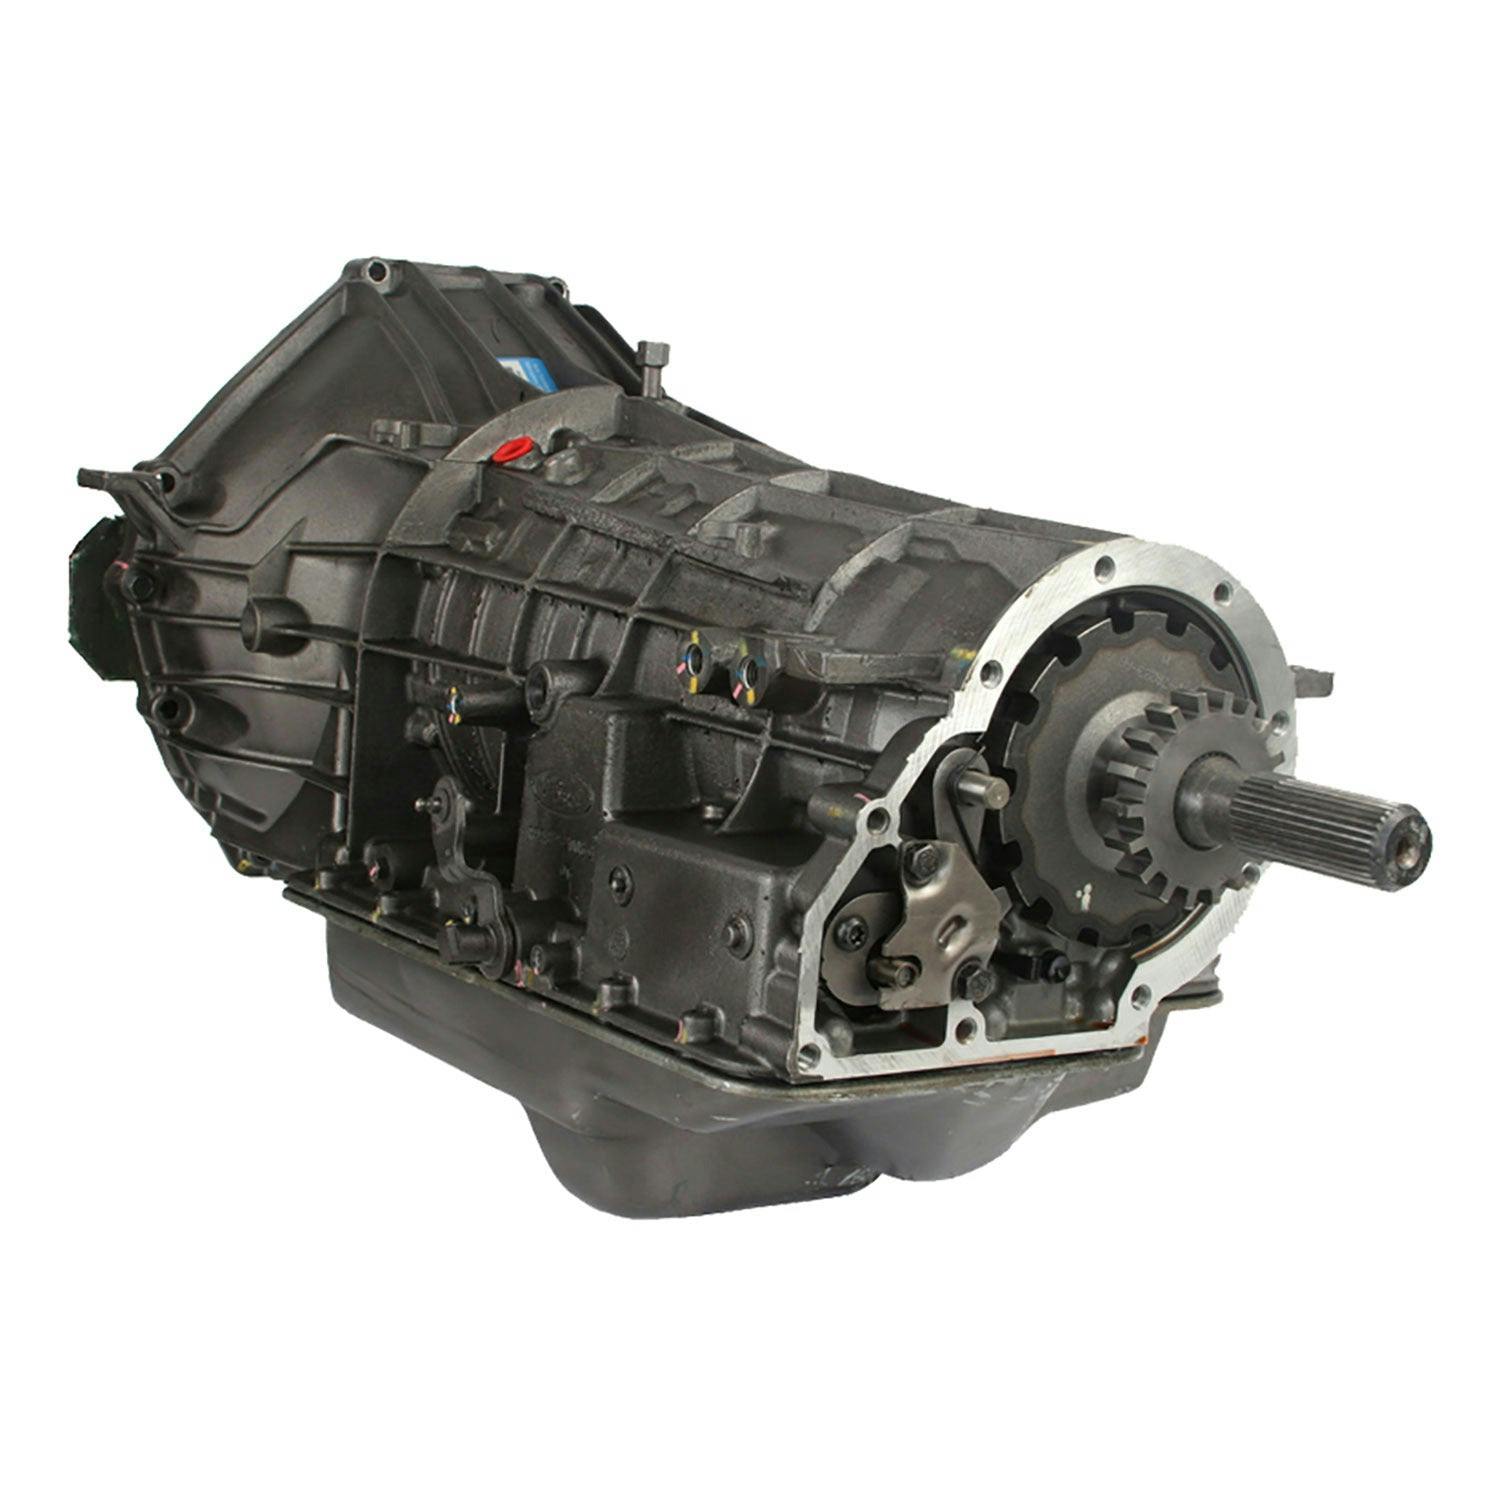 Automatic Transmission for 1998-1999 Ford E-350 Econoline, Econoline Club Wagon, Super Duty/Econoline Super Duty/F-250, 350, 450, 550 Super Duty, 53 Motorhome Chassis with 6.8L V10 Engine